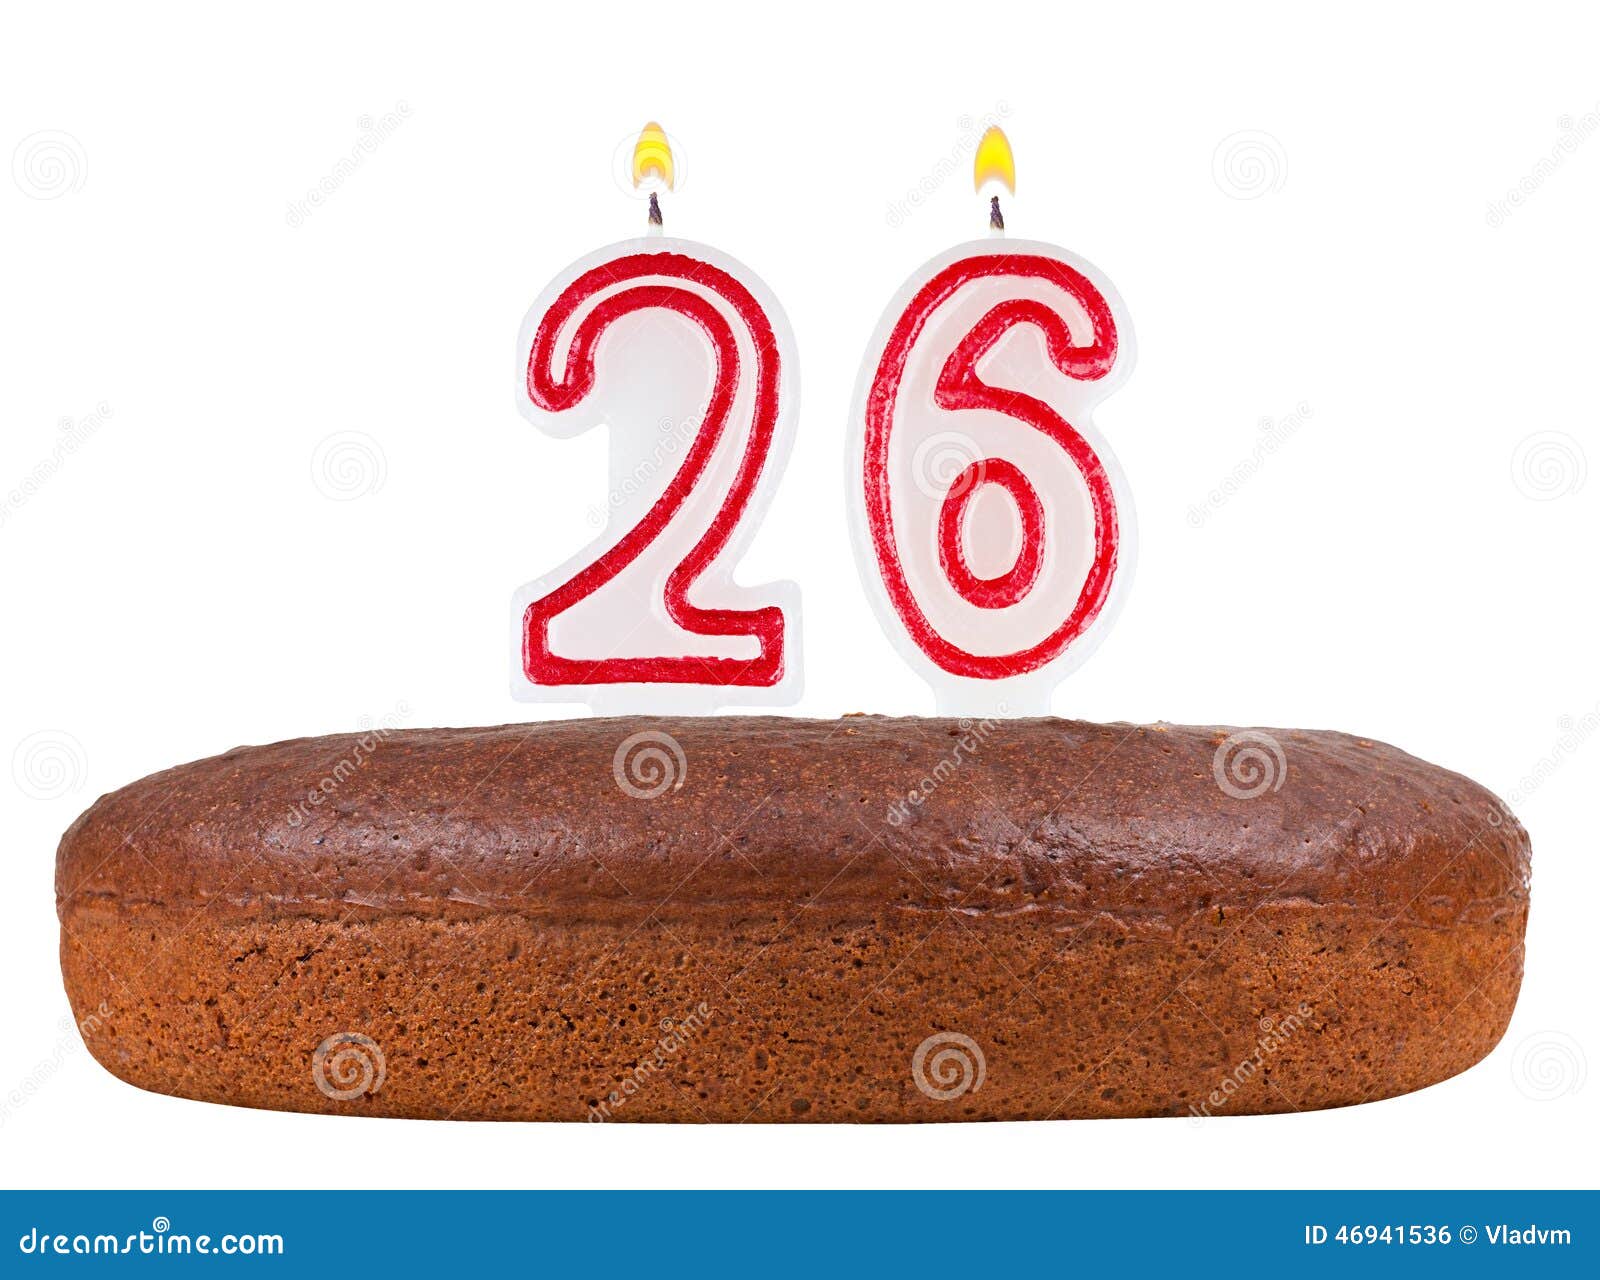 Birthday Cake With Candles Number 26 Isolated Stock Photo ...